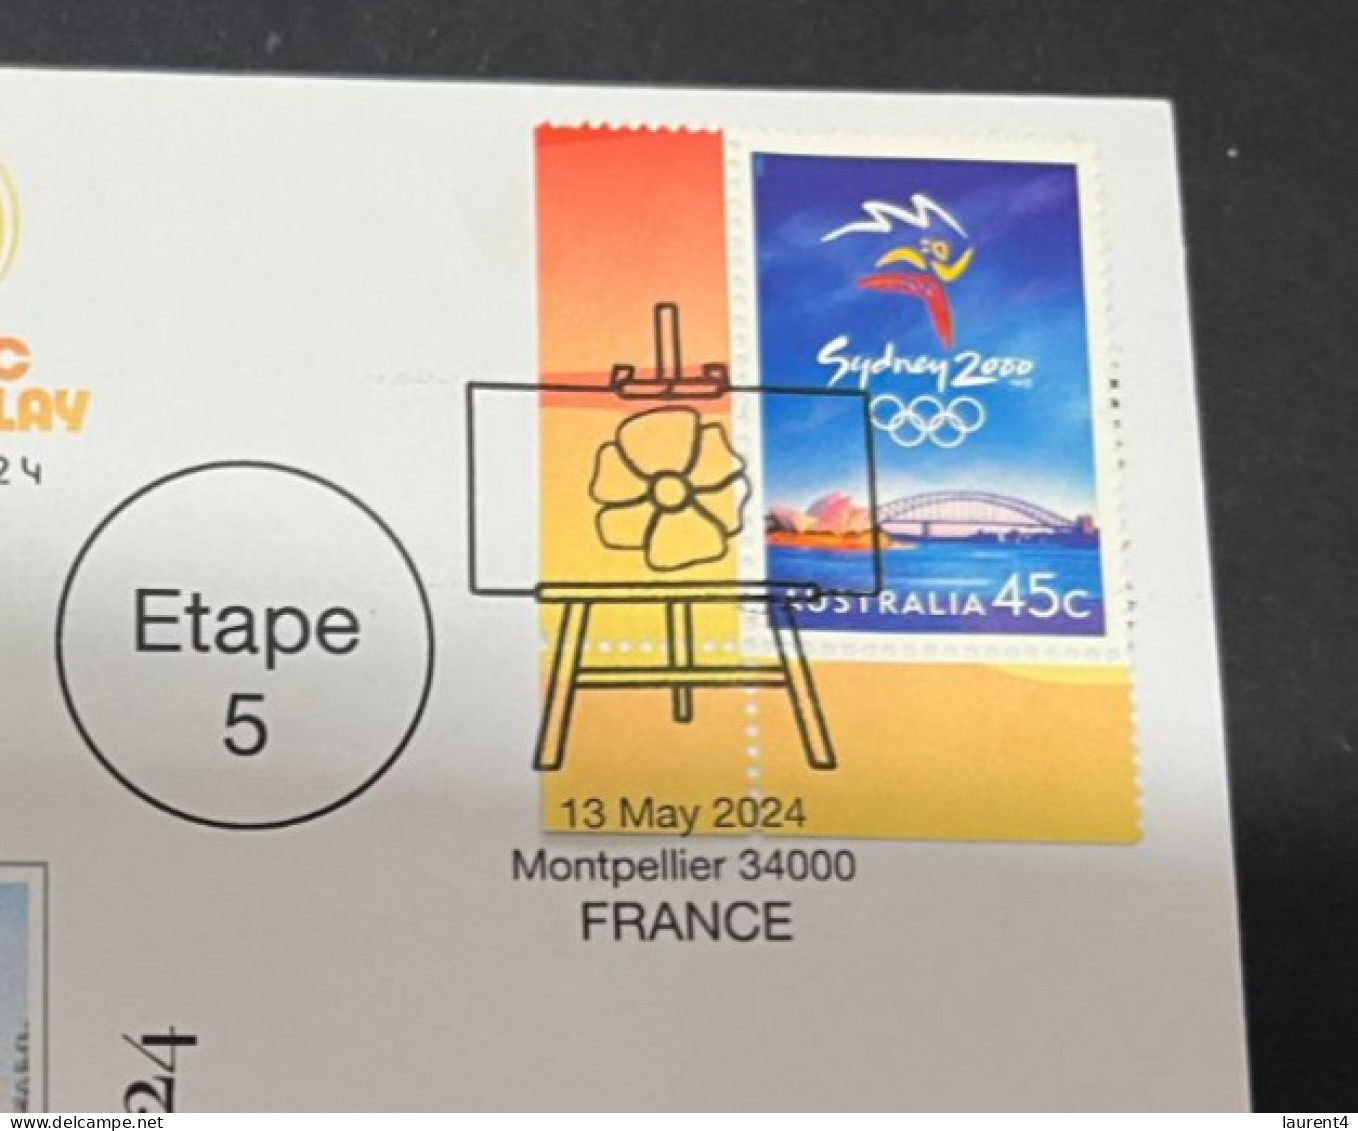 14-5-2024 (5 Z 7) Paris Olympic Games 2024 - Torch Relay (Etape 5) In Montpellier (13-5-2024) With OLYMPIC Stamp - Sommer 2024: Paris